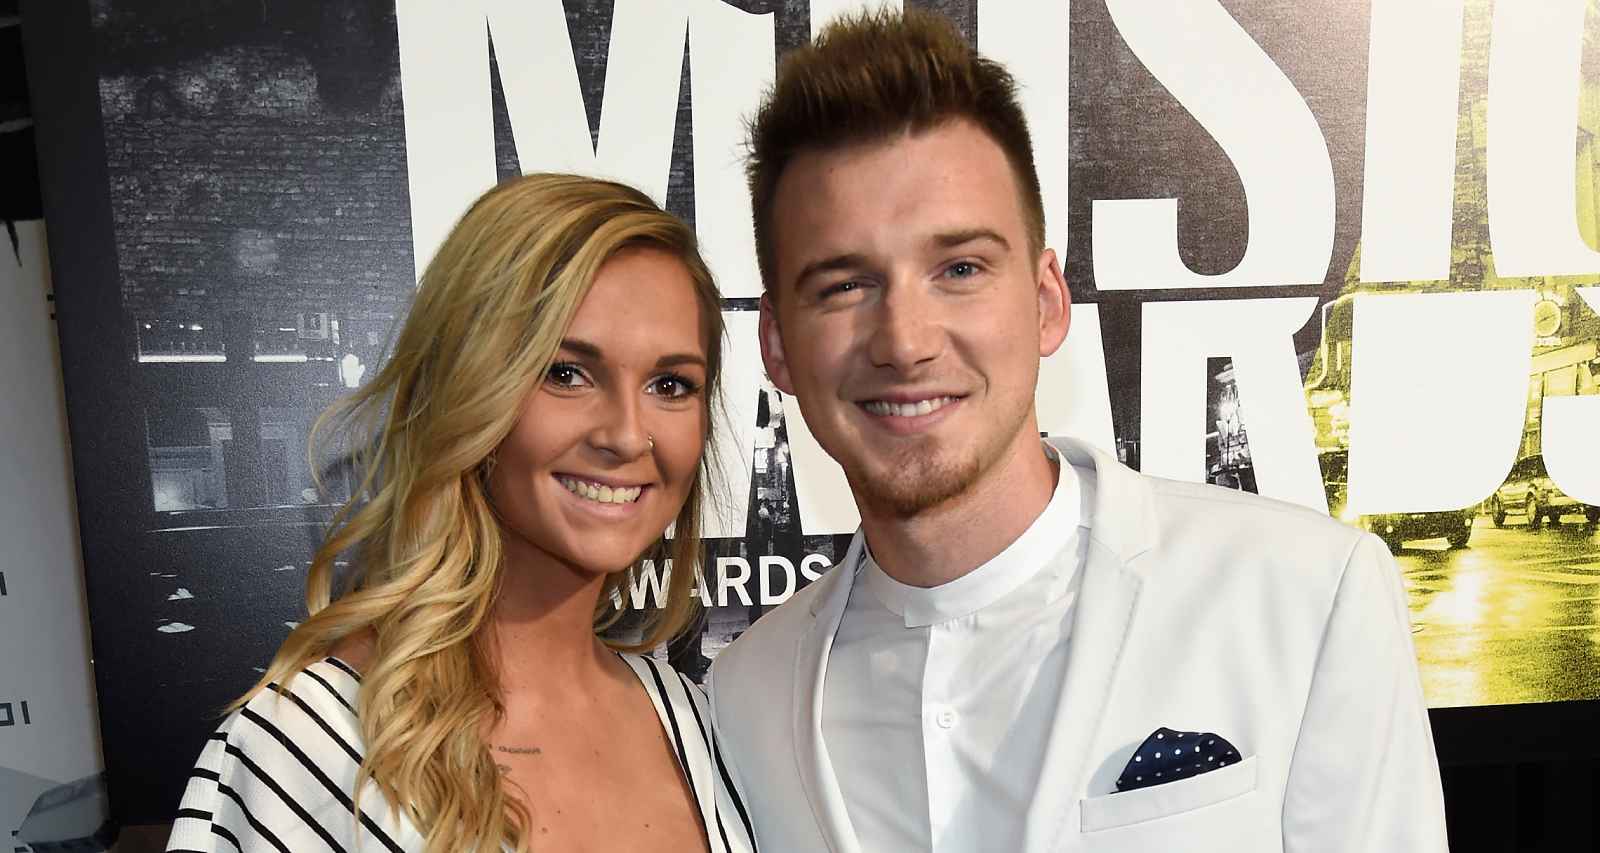 Katie Dell Smith Wiki, Age, Family and Facts About Morgan Wallen’s Ex and Baby Mama